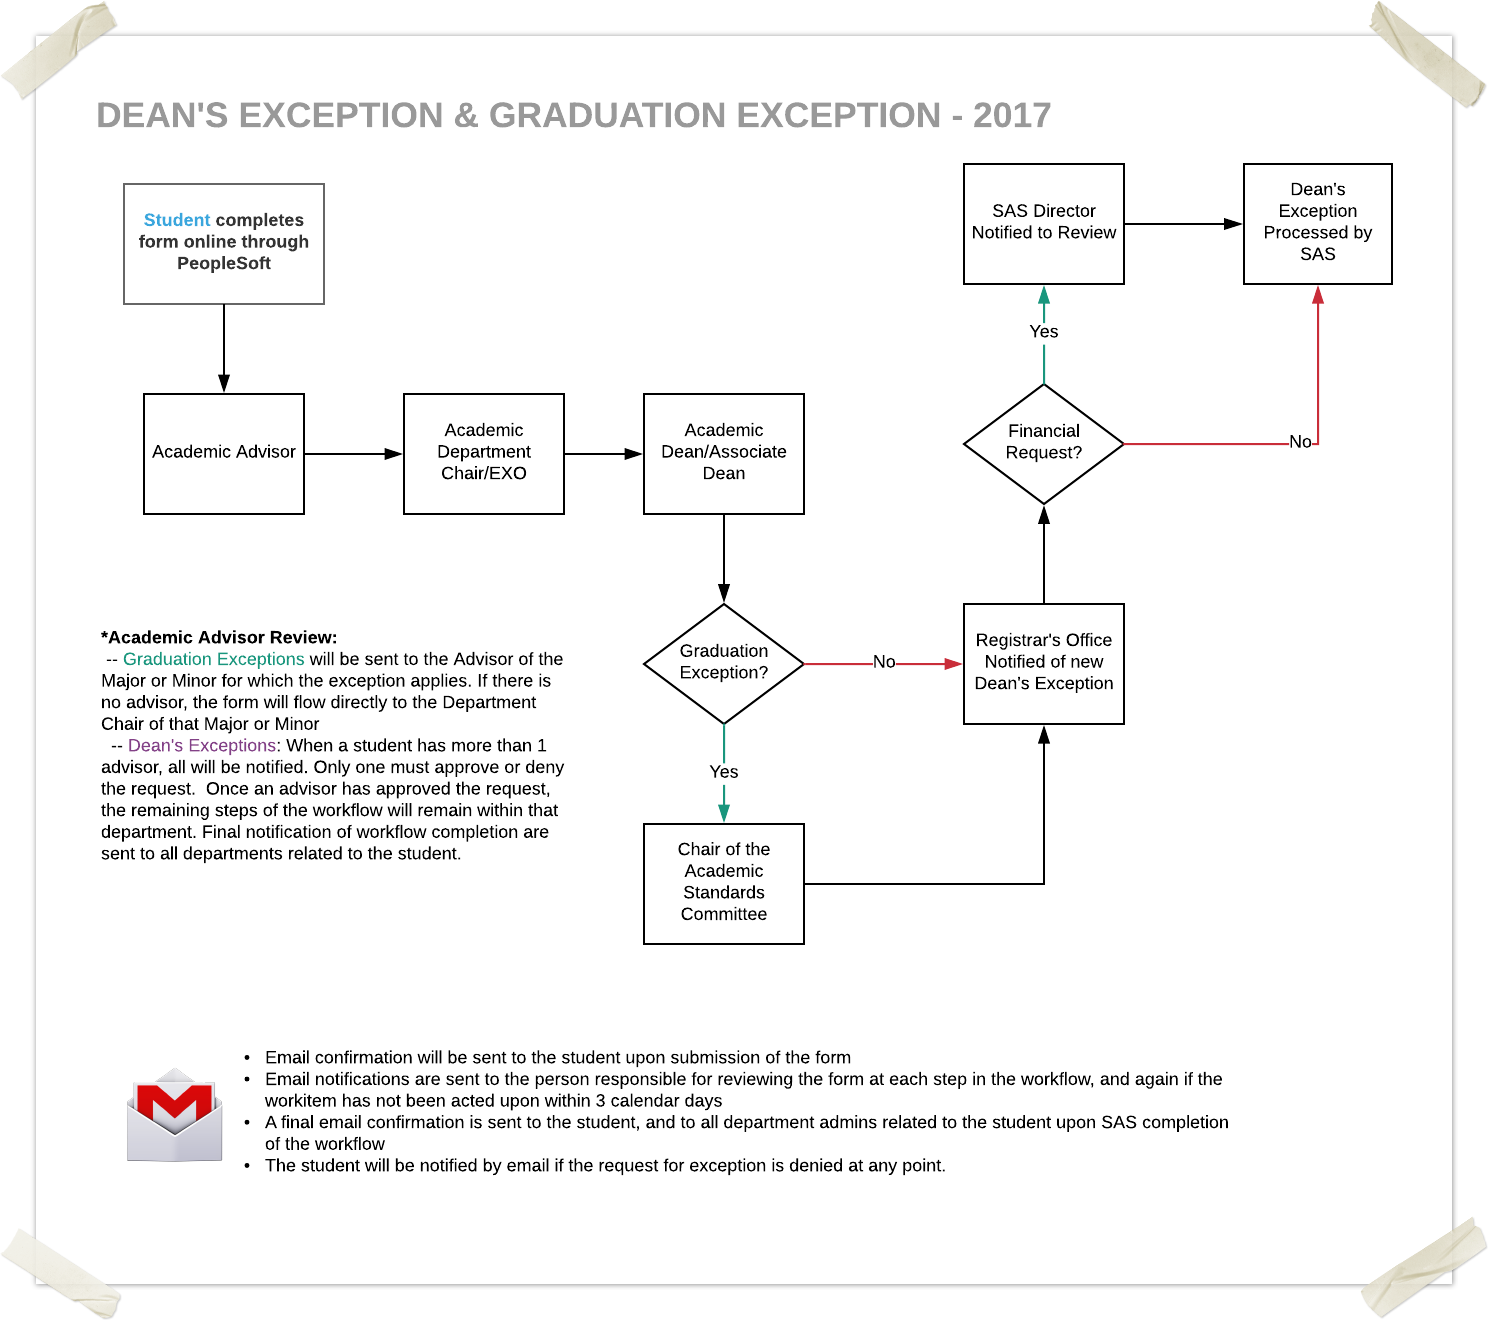 Deans and Graduation Exception Workflow 2017 (1).png